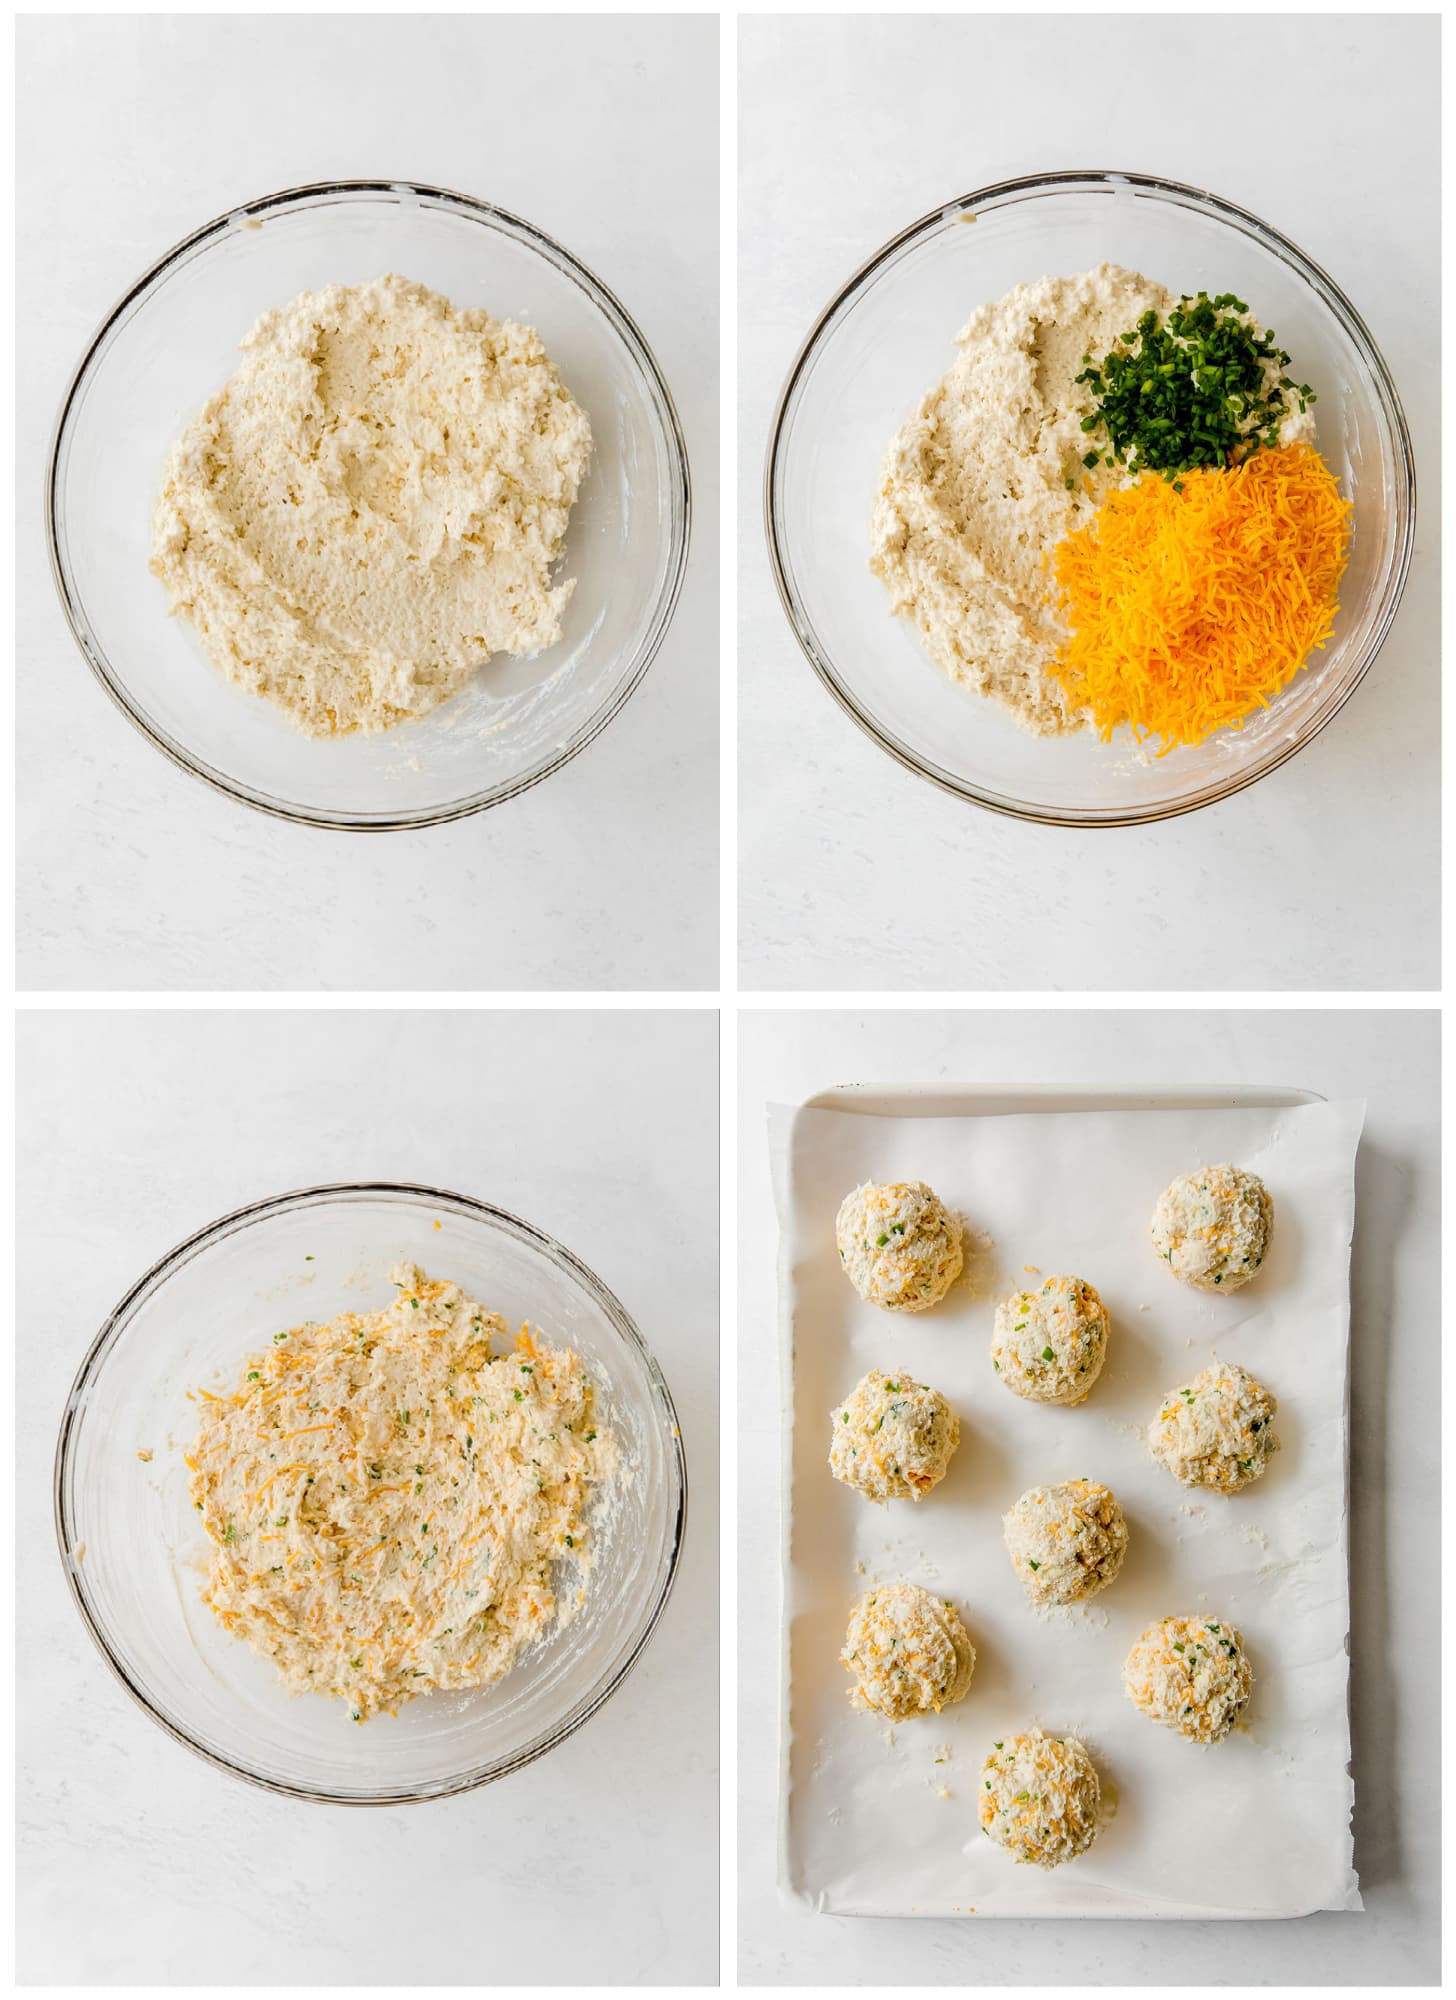 photo collage demonstrating steps 5 through 8 to make cheddar biscuits in a mixing bowl and dough dropped on baking sheet